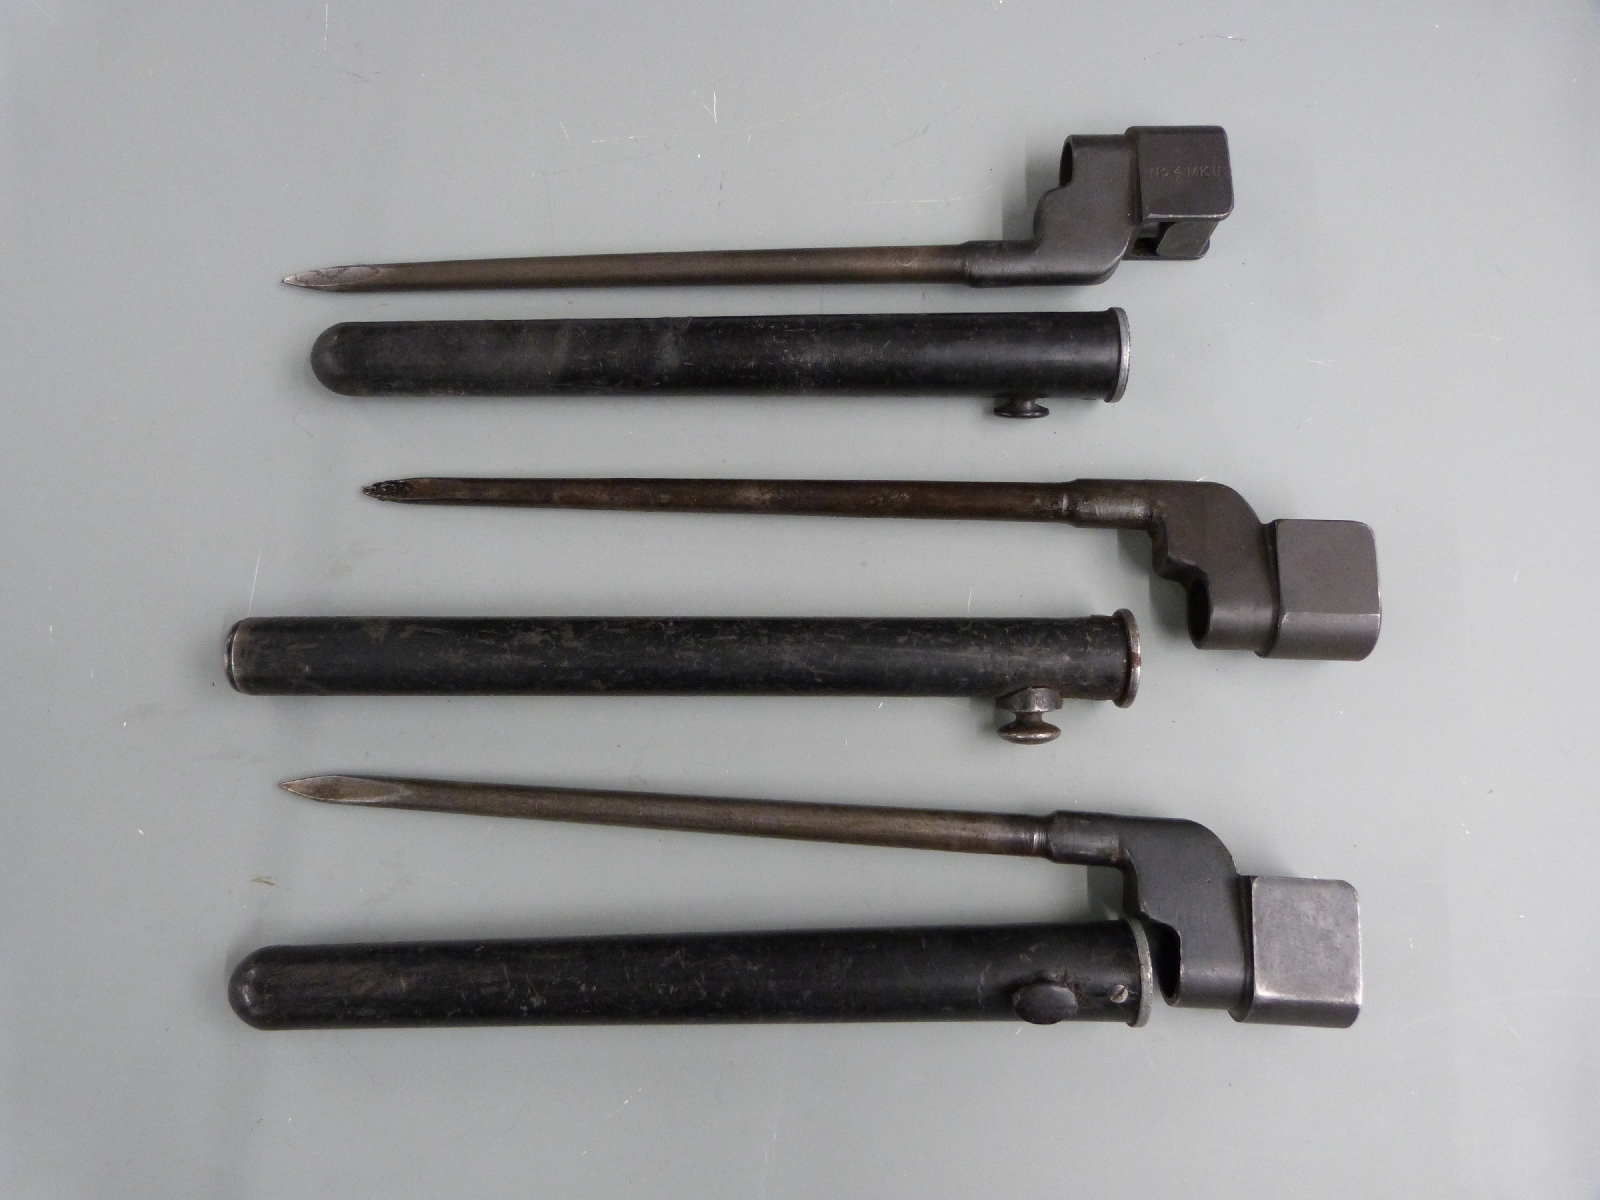 Three British No4 Mk2 spike bayonets with 20cm blades with scabbards